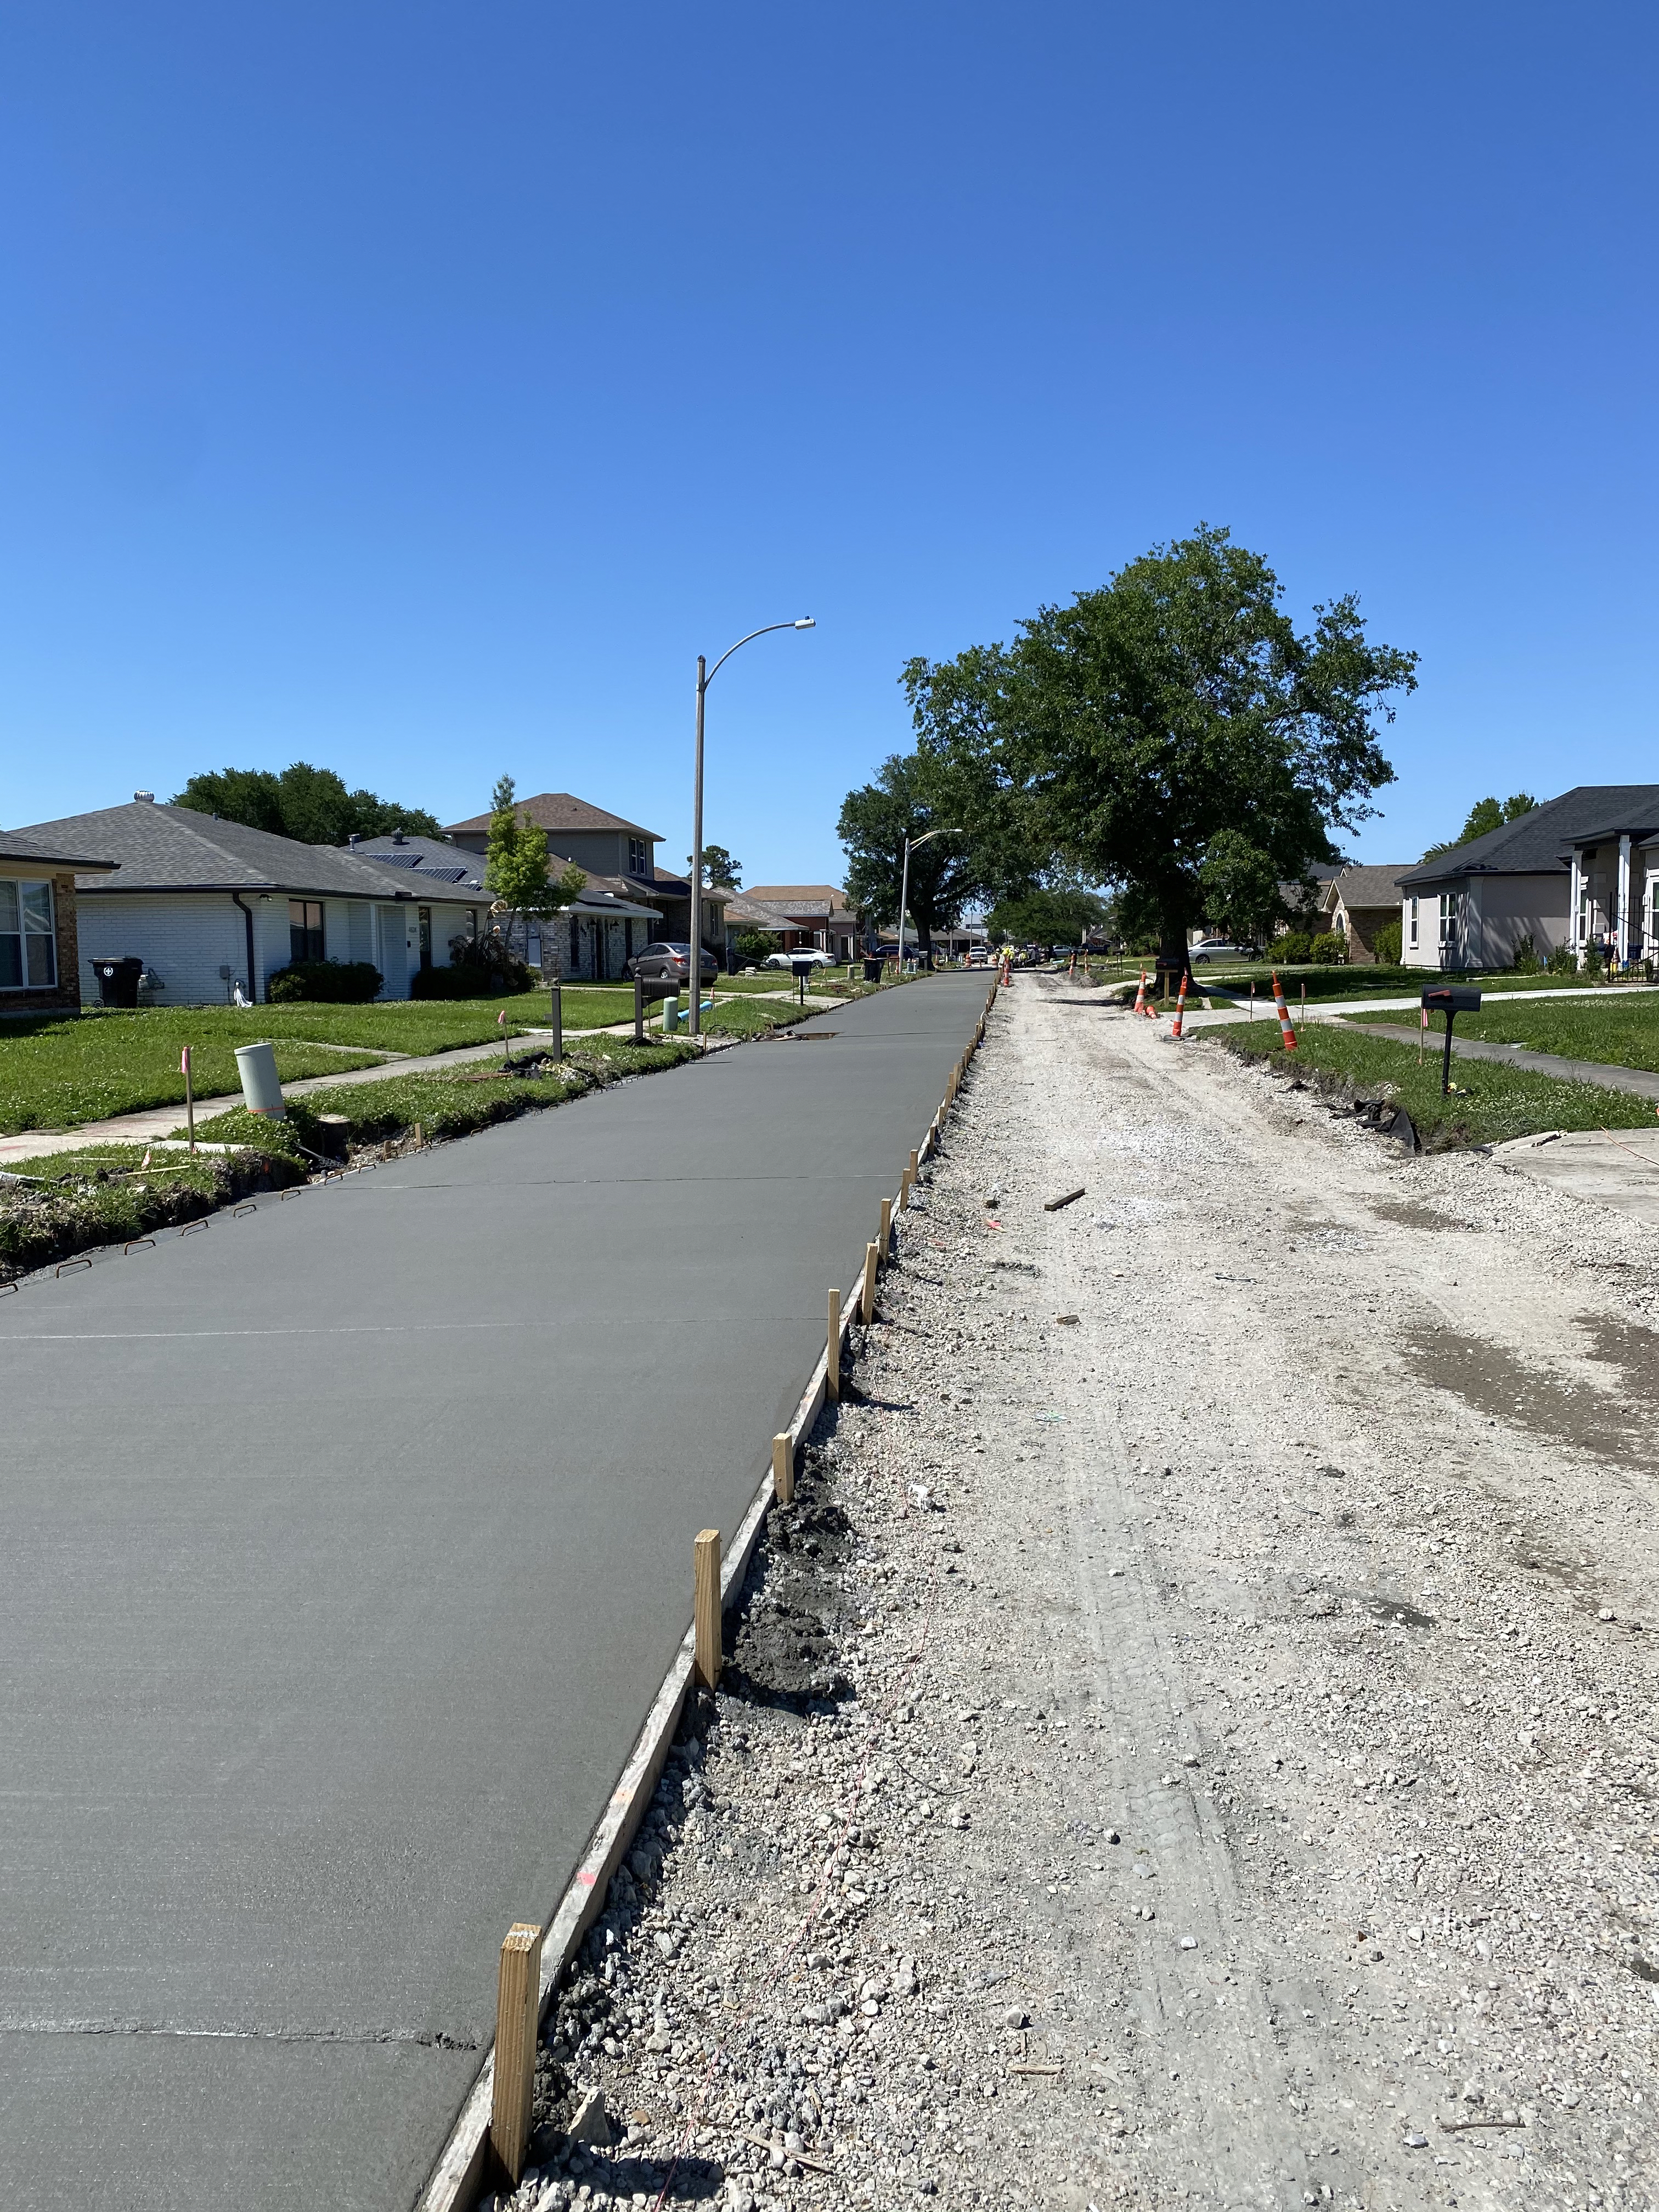 PAVING OPERATIONS CONTINUE ON THE READ BOULEVARD WEST GROUP C